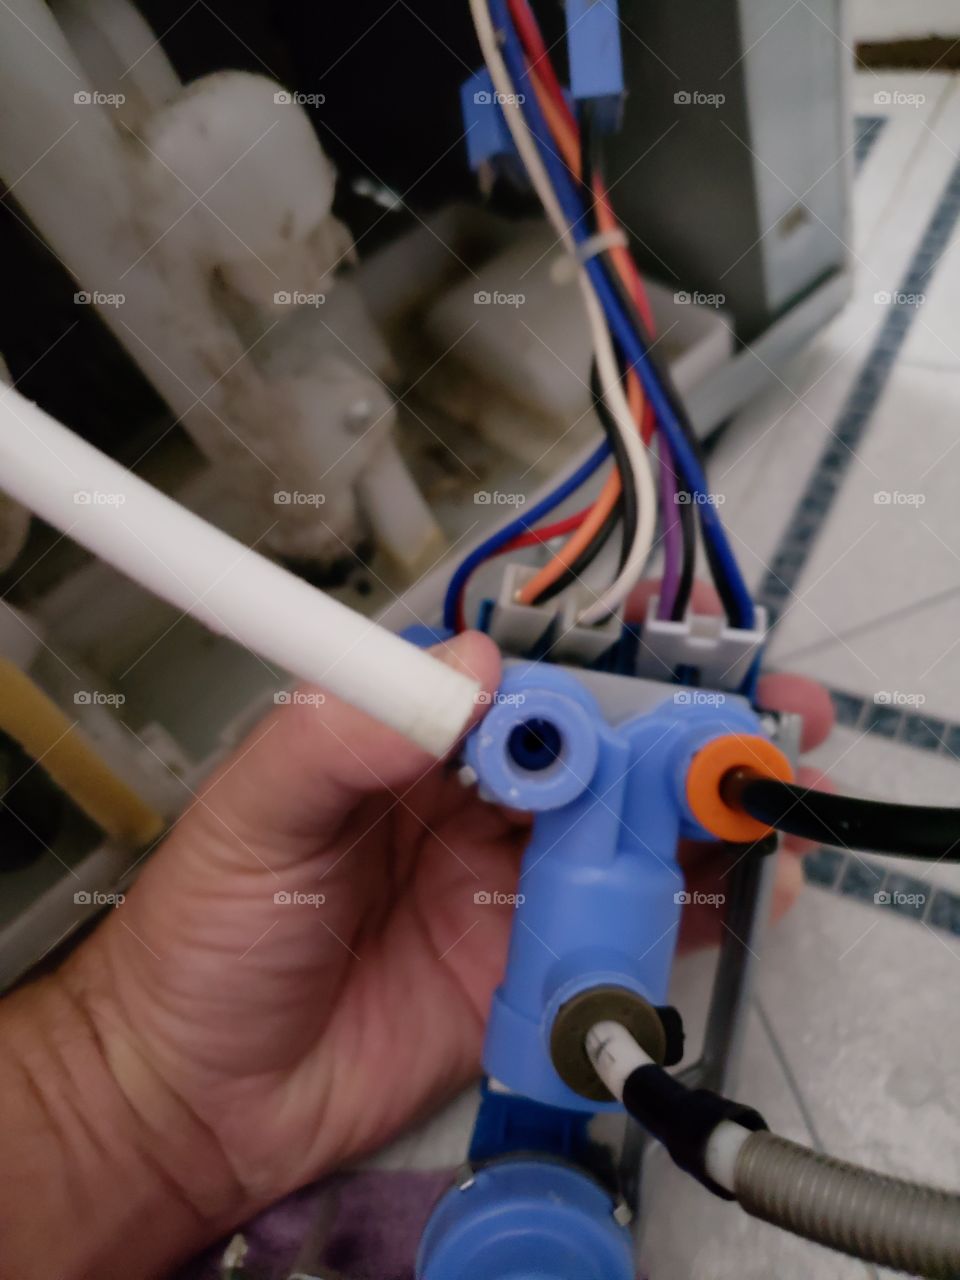 Solenoid for an ice maker